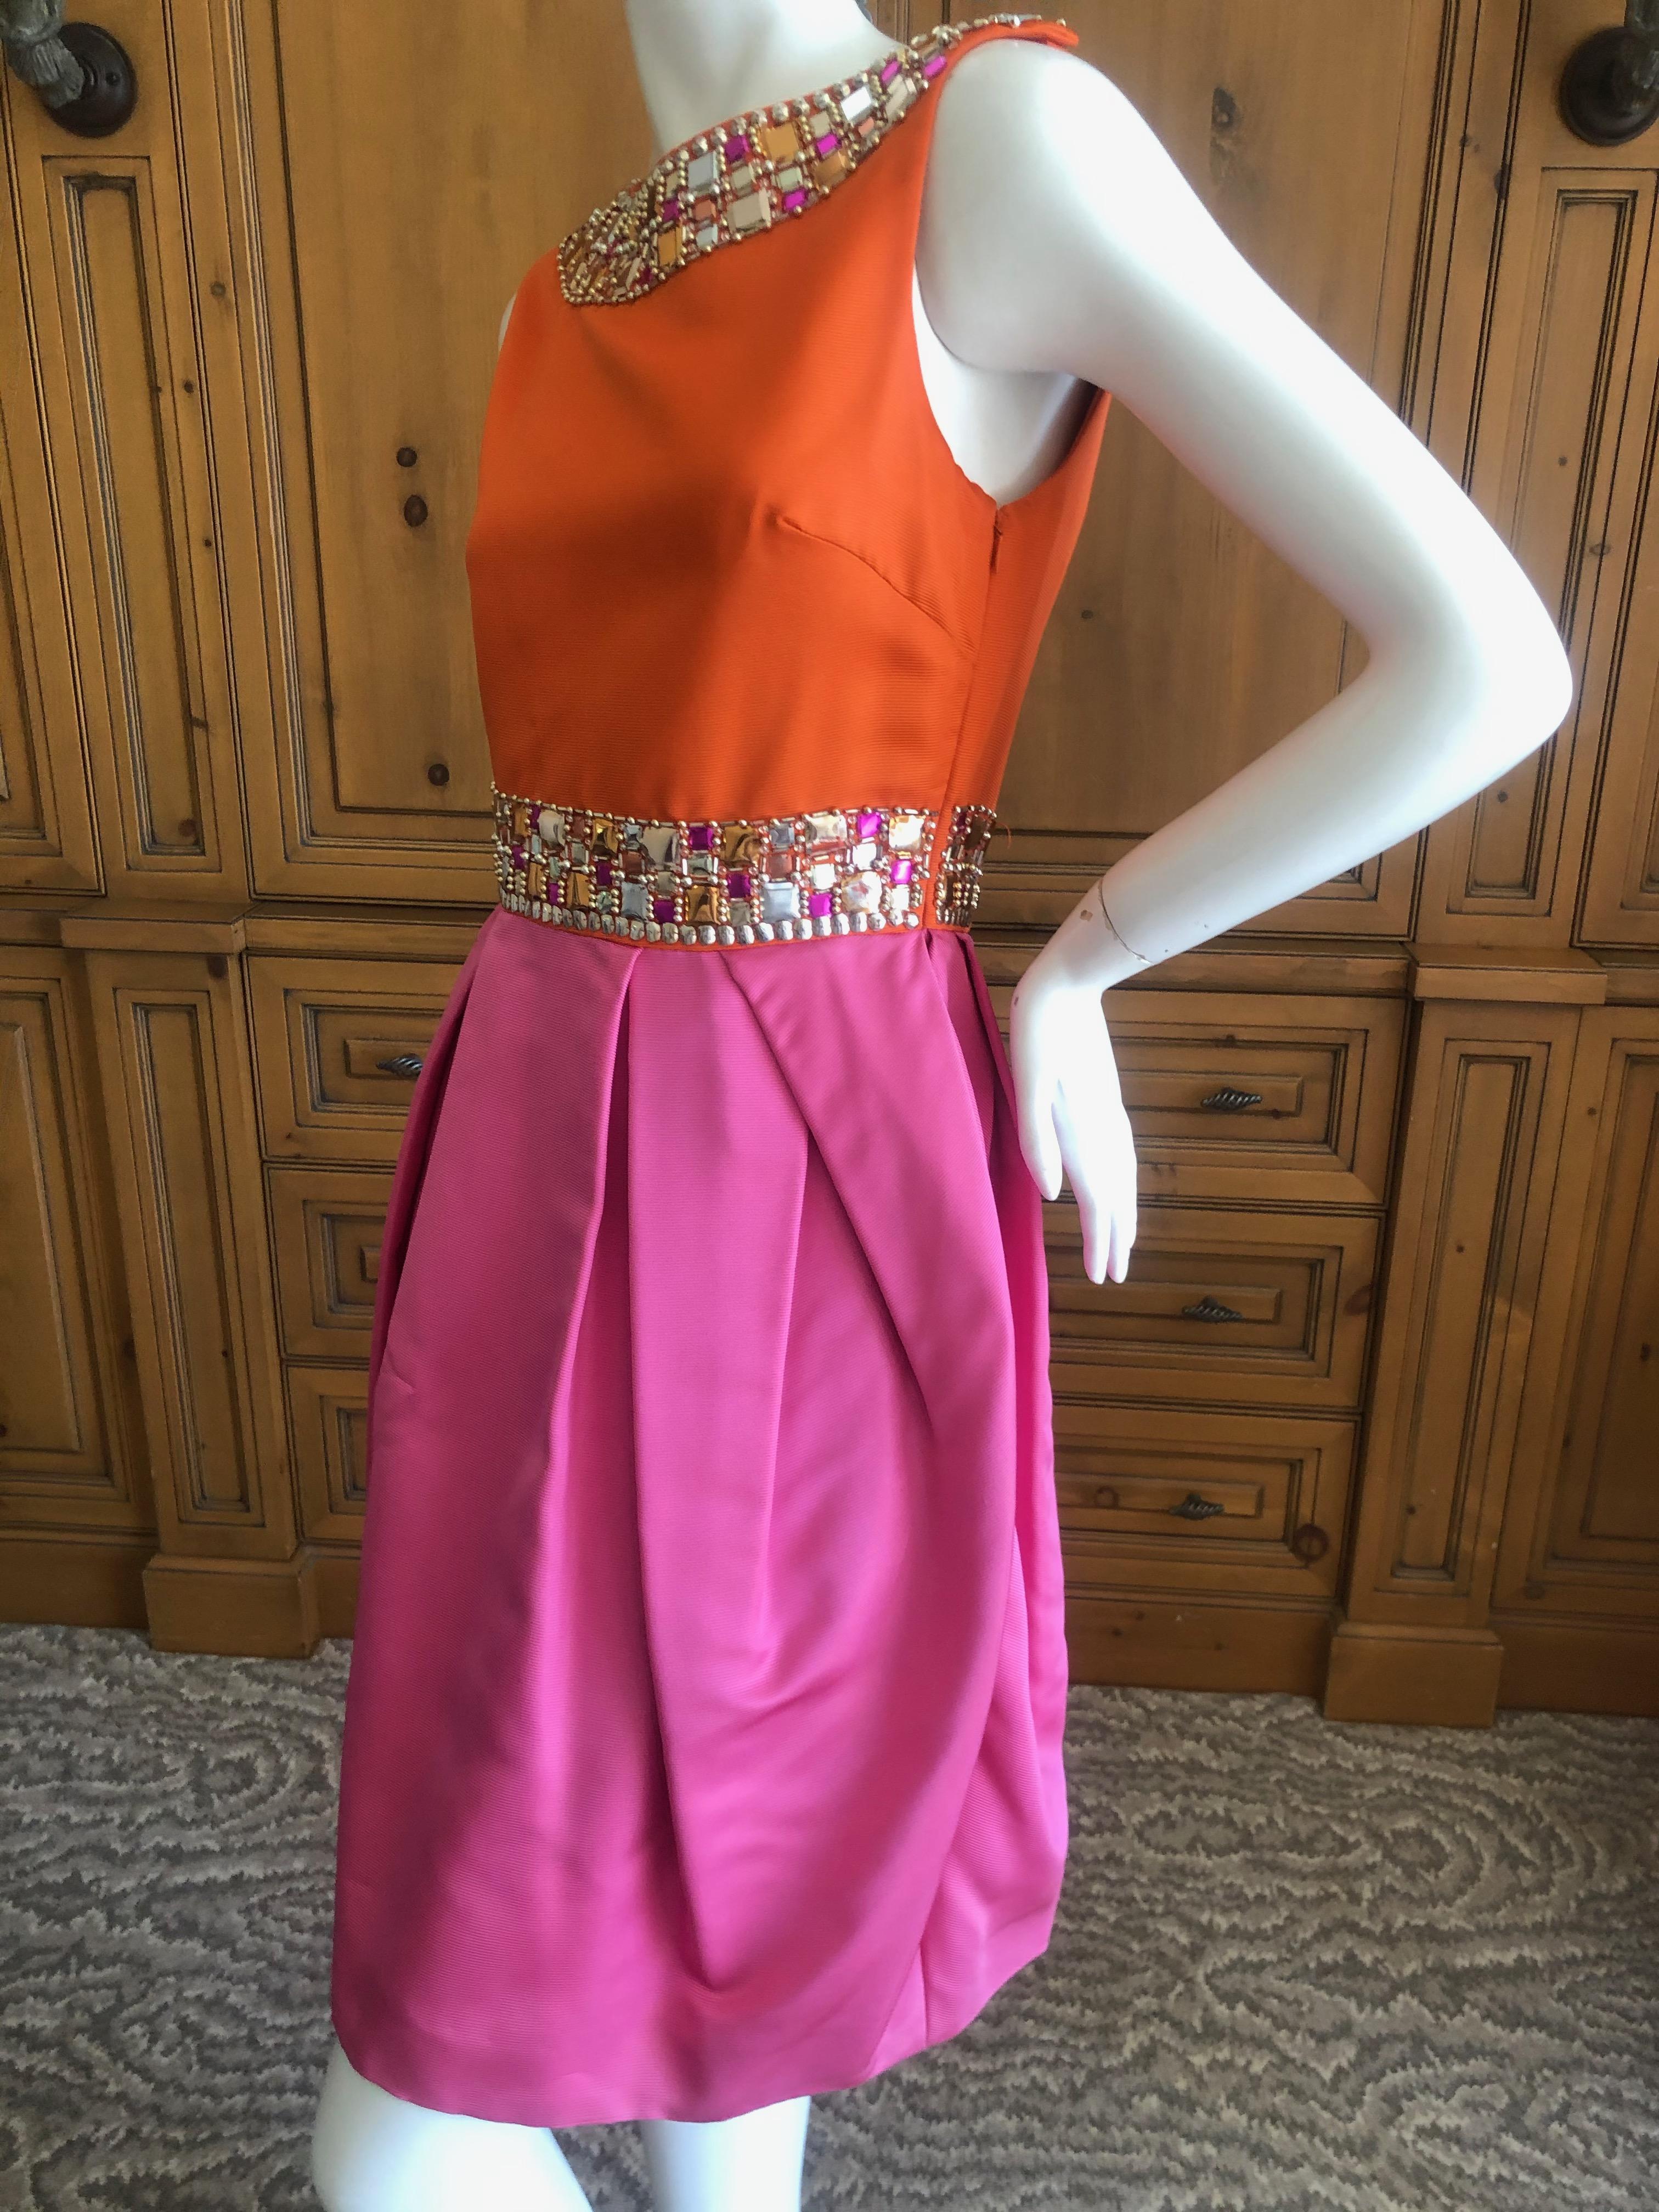  Dior by John Galliano Orange and Pink Silk Sixties Style Embellished Dress 2